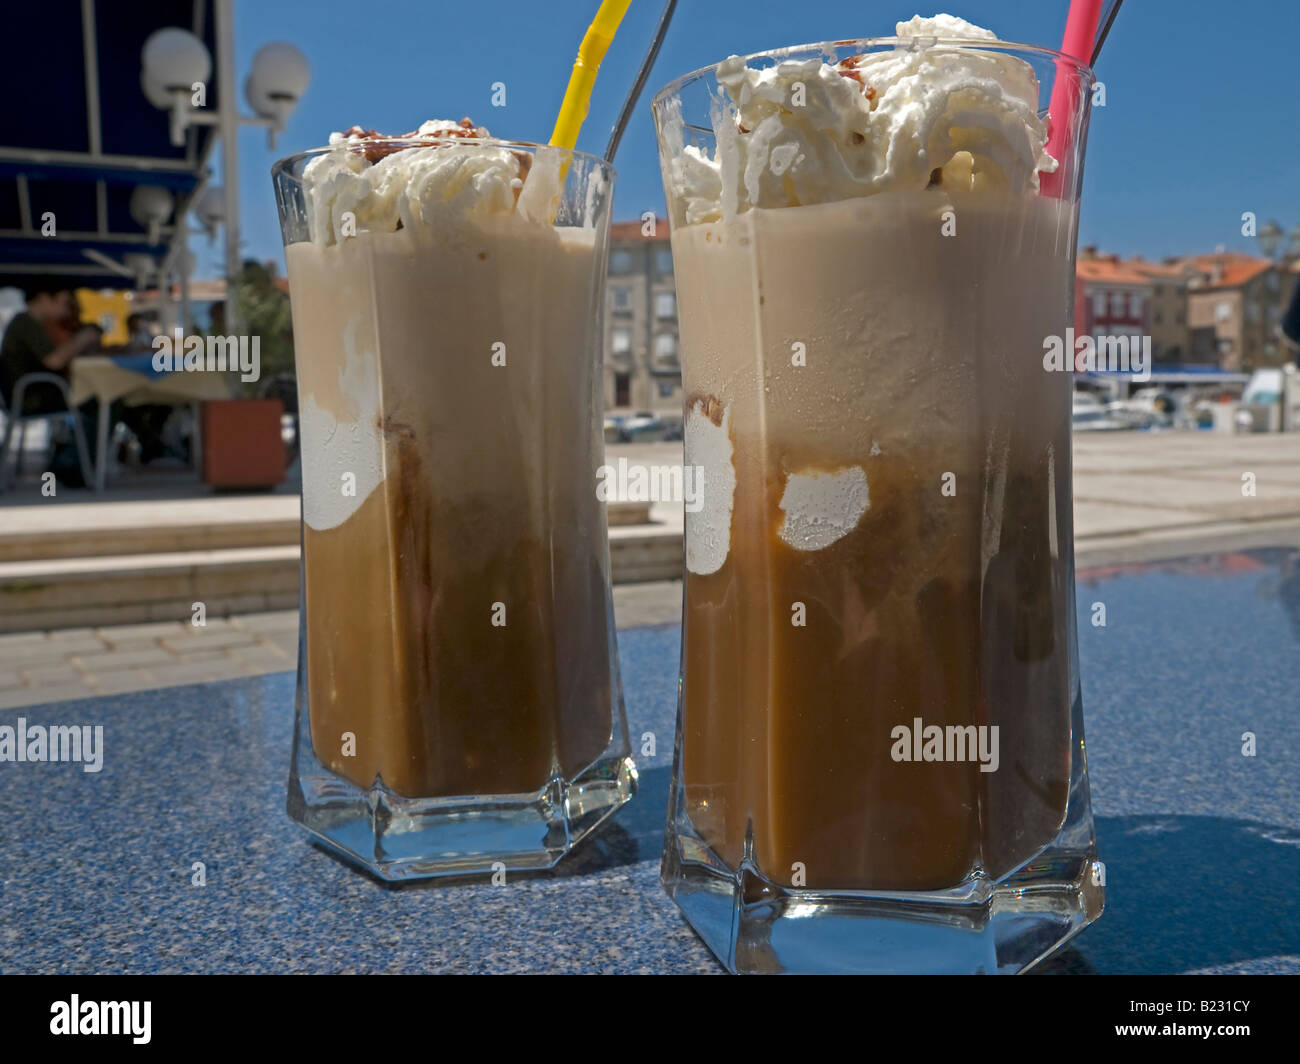 https://c8.alamy.com/comp/B231CY/two-glasses-with-ice-coffee-in-a-bar-in-the-town-cres-in-the-summer-B231CY.jpg